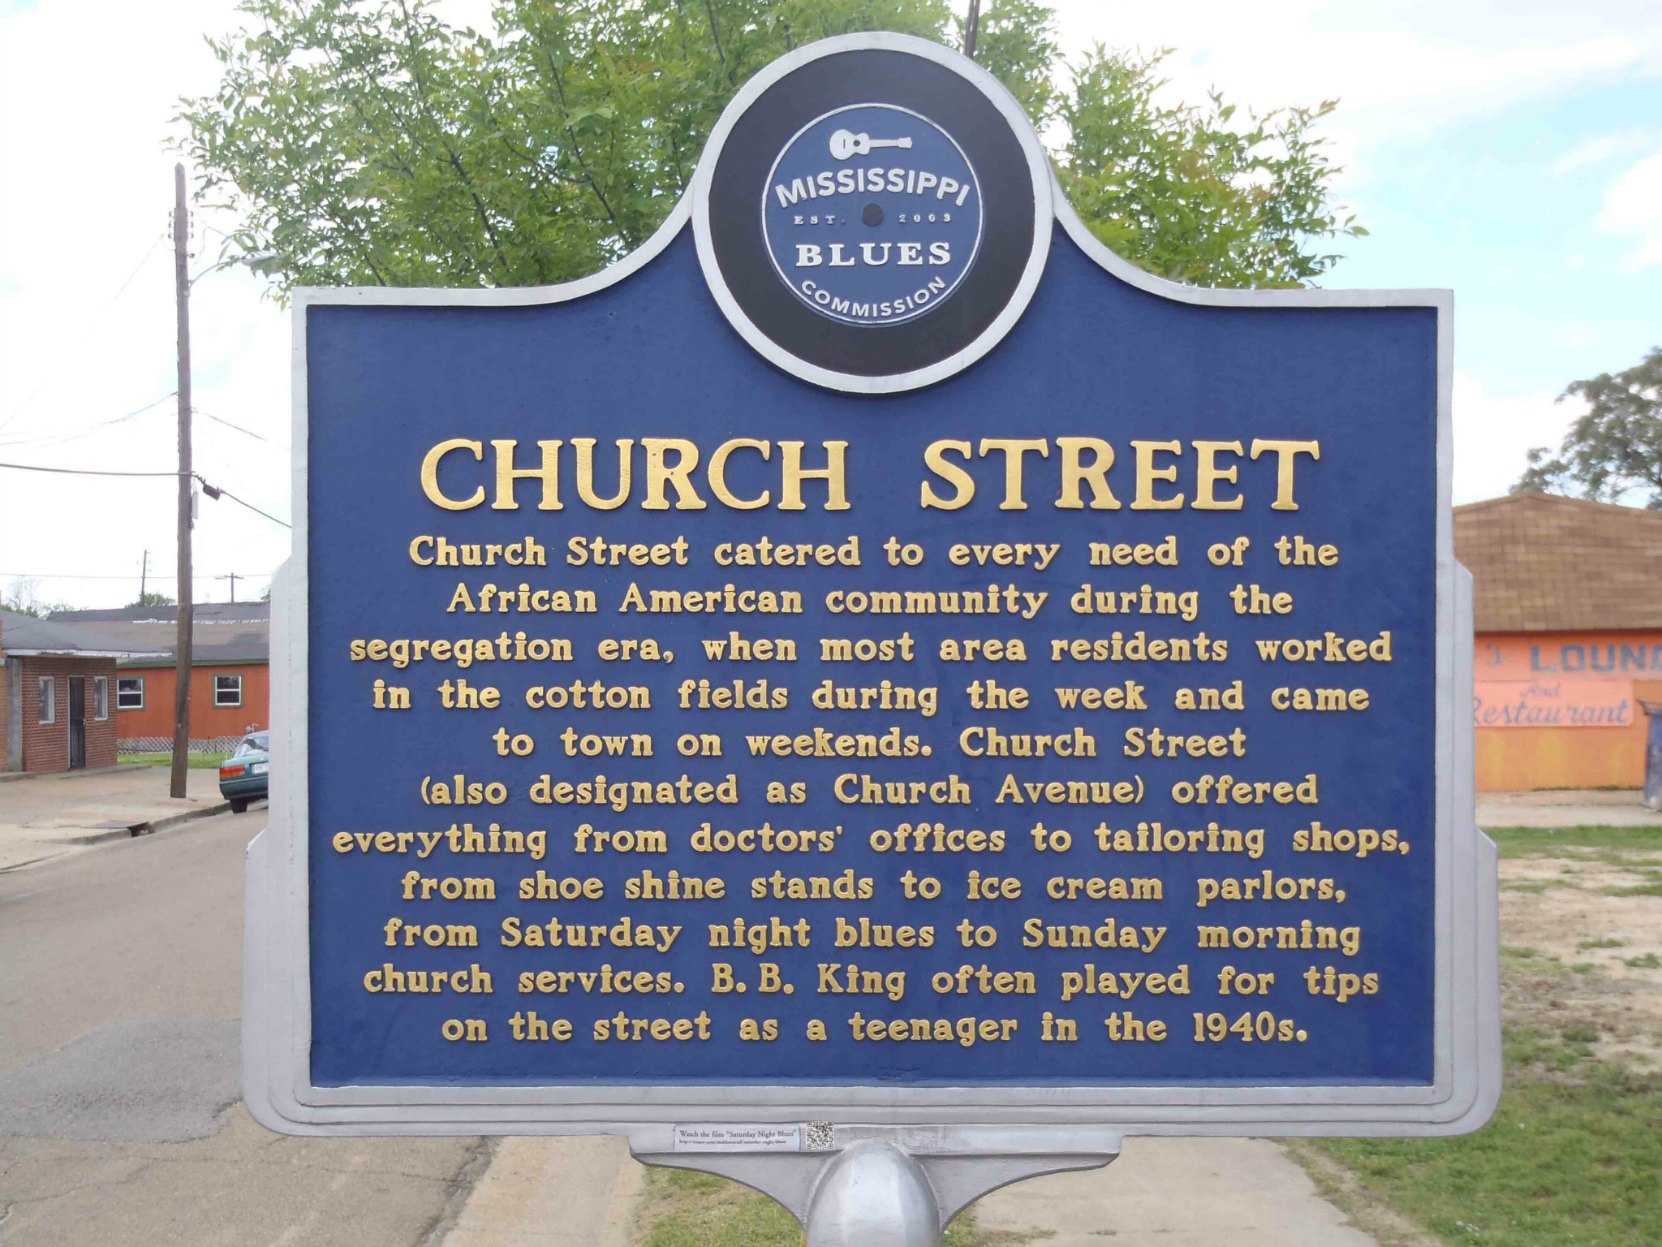 Mississippi Blues Trail marker commemorating Church Street, Indianola, Mississippi